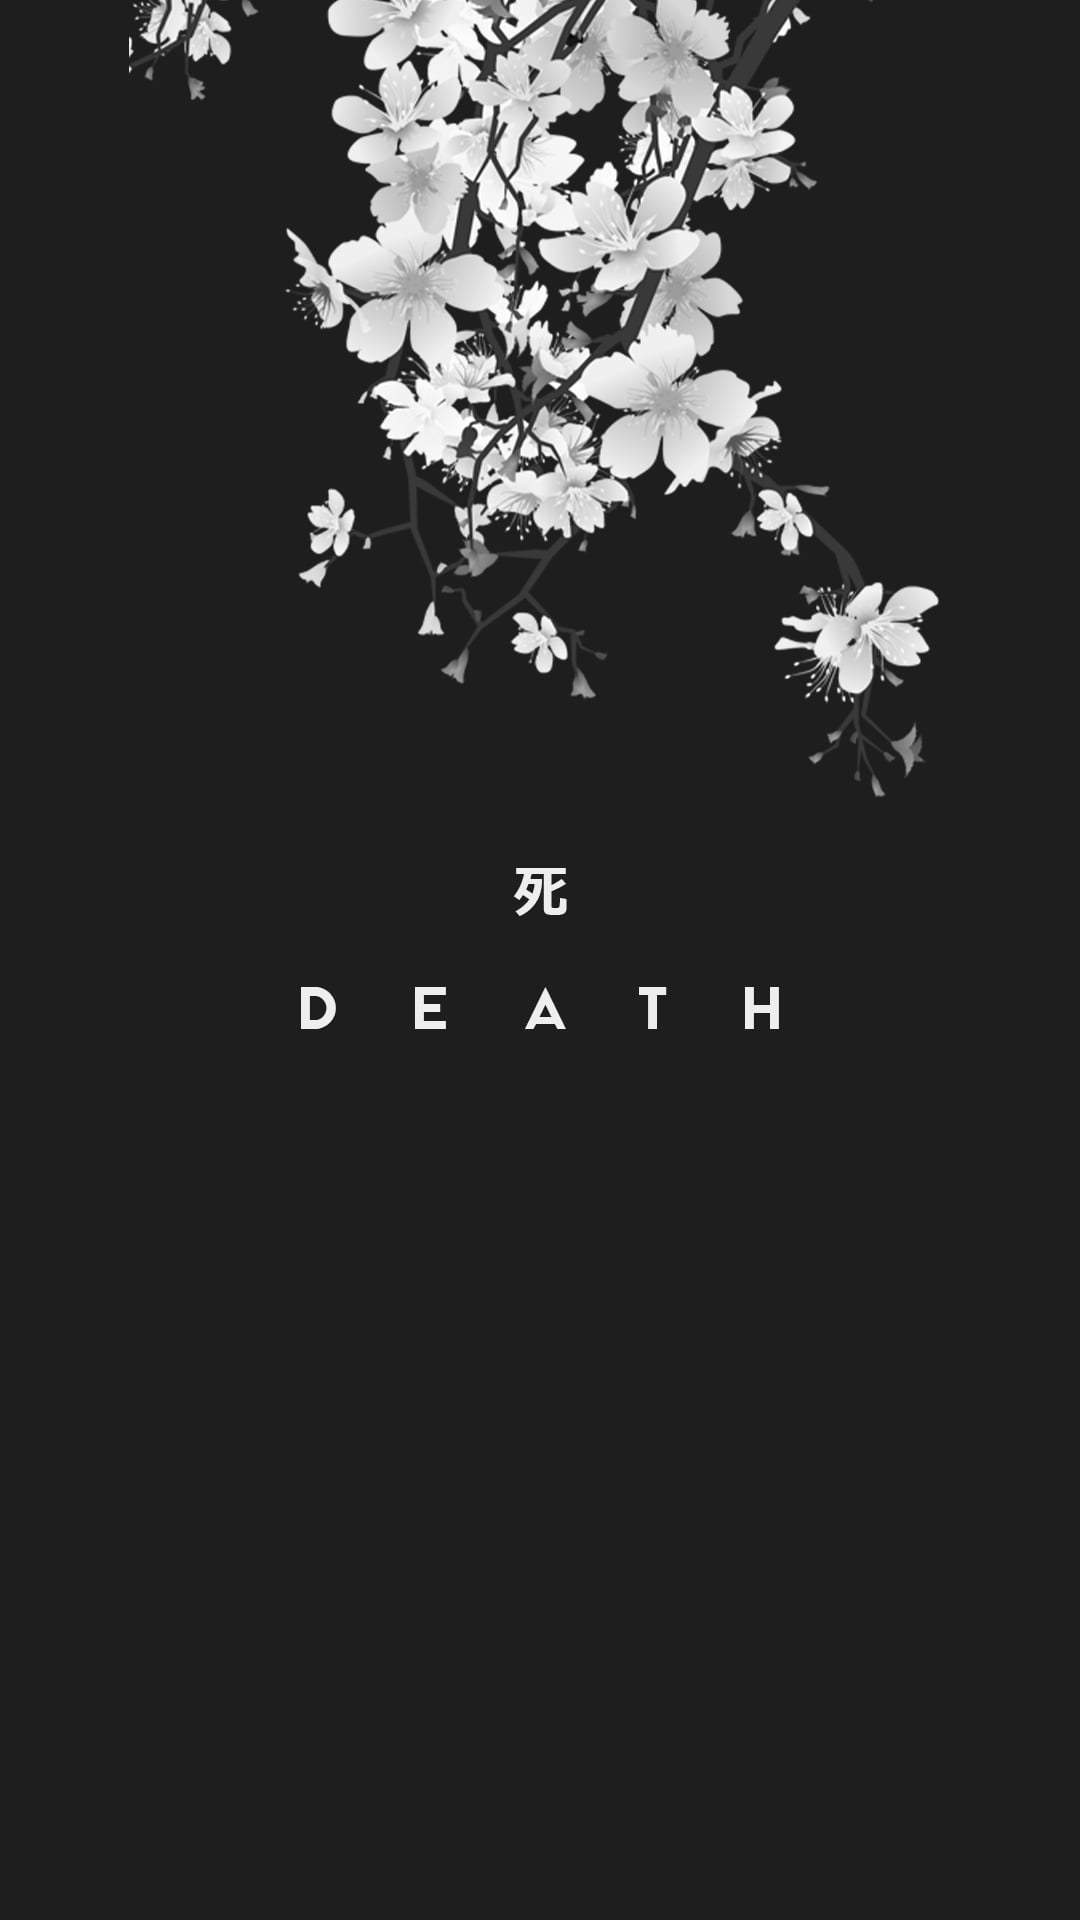 the death of the flowers